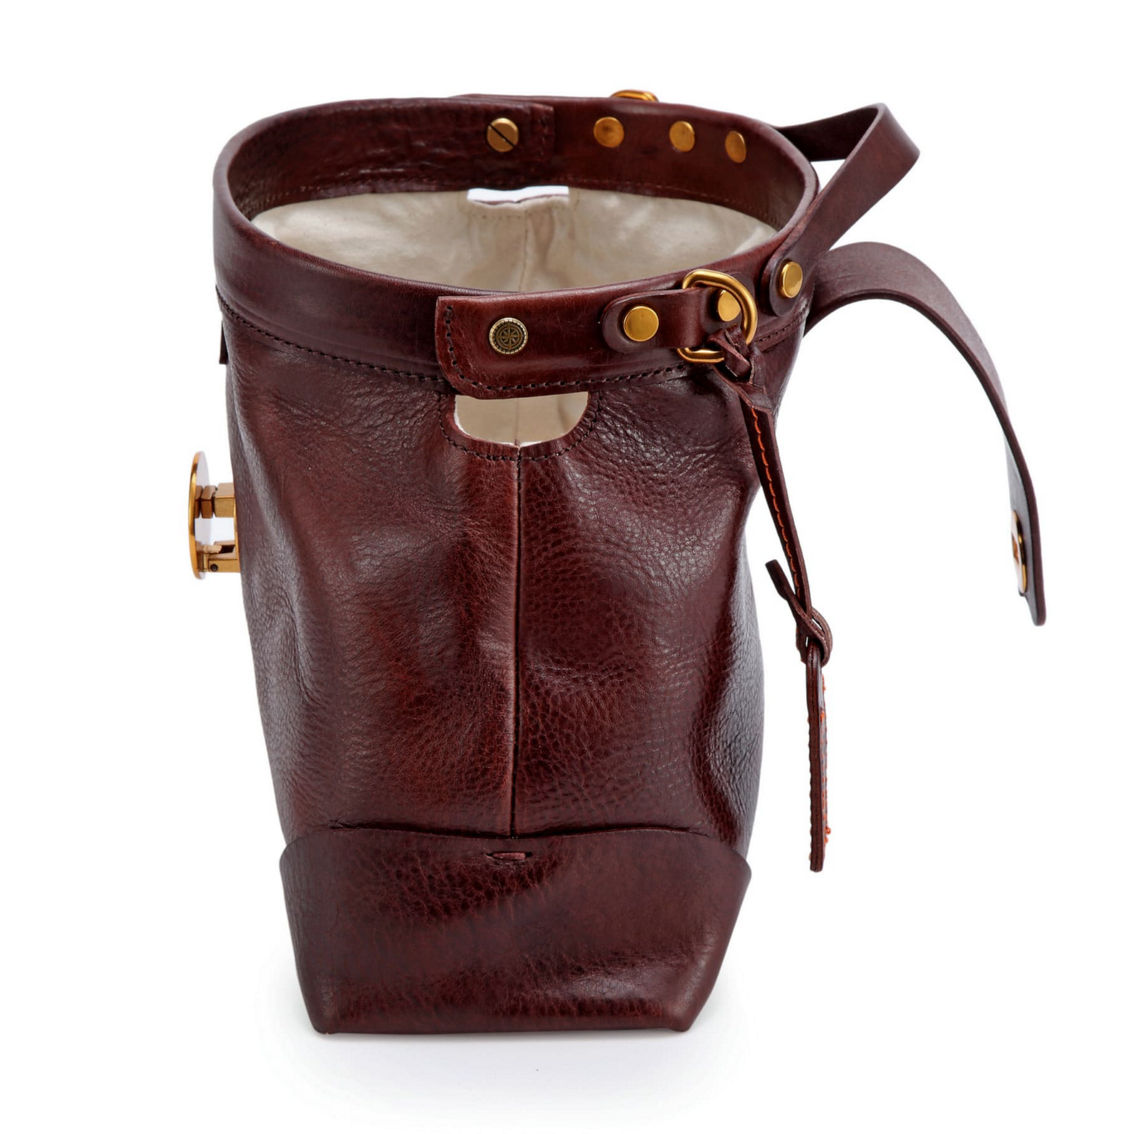 Old Trend Gypsy Soul Leather Crossbody - Image 5 of 5